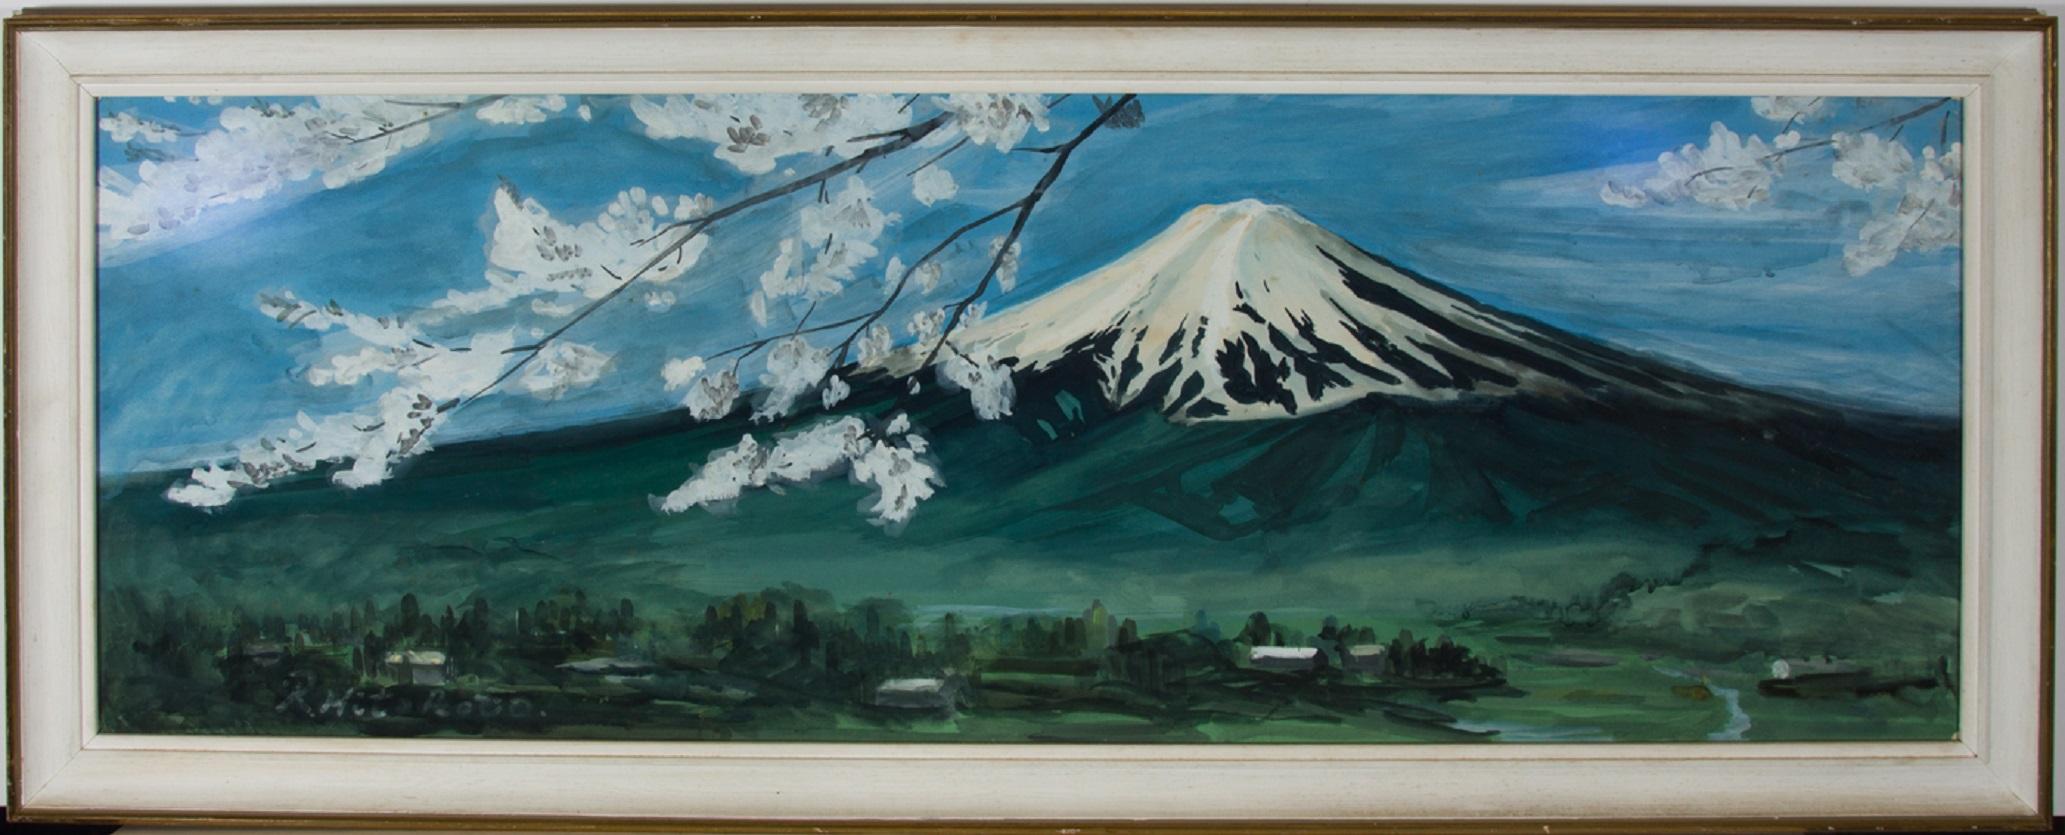 Unknown Landscape Art - R. Hitoroto  - Signed & Framed 20th Century Gouache, Mount Fuji With Blossom